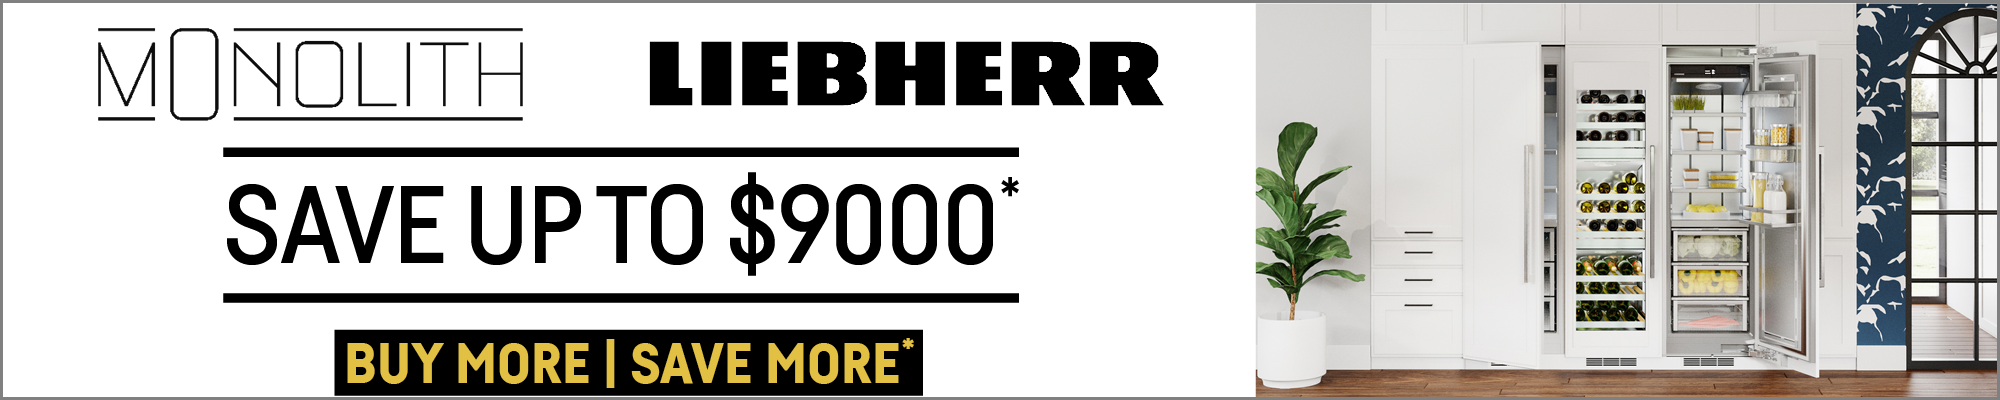 Save Up To $9,000* On Eligible Liebherr Monolith Products